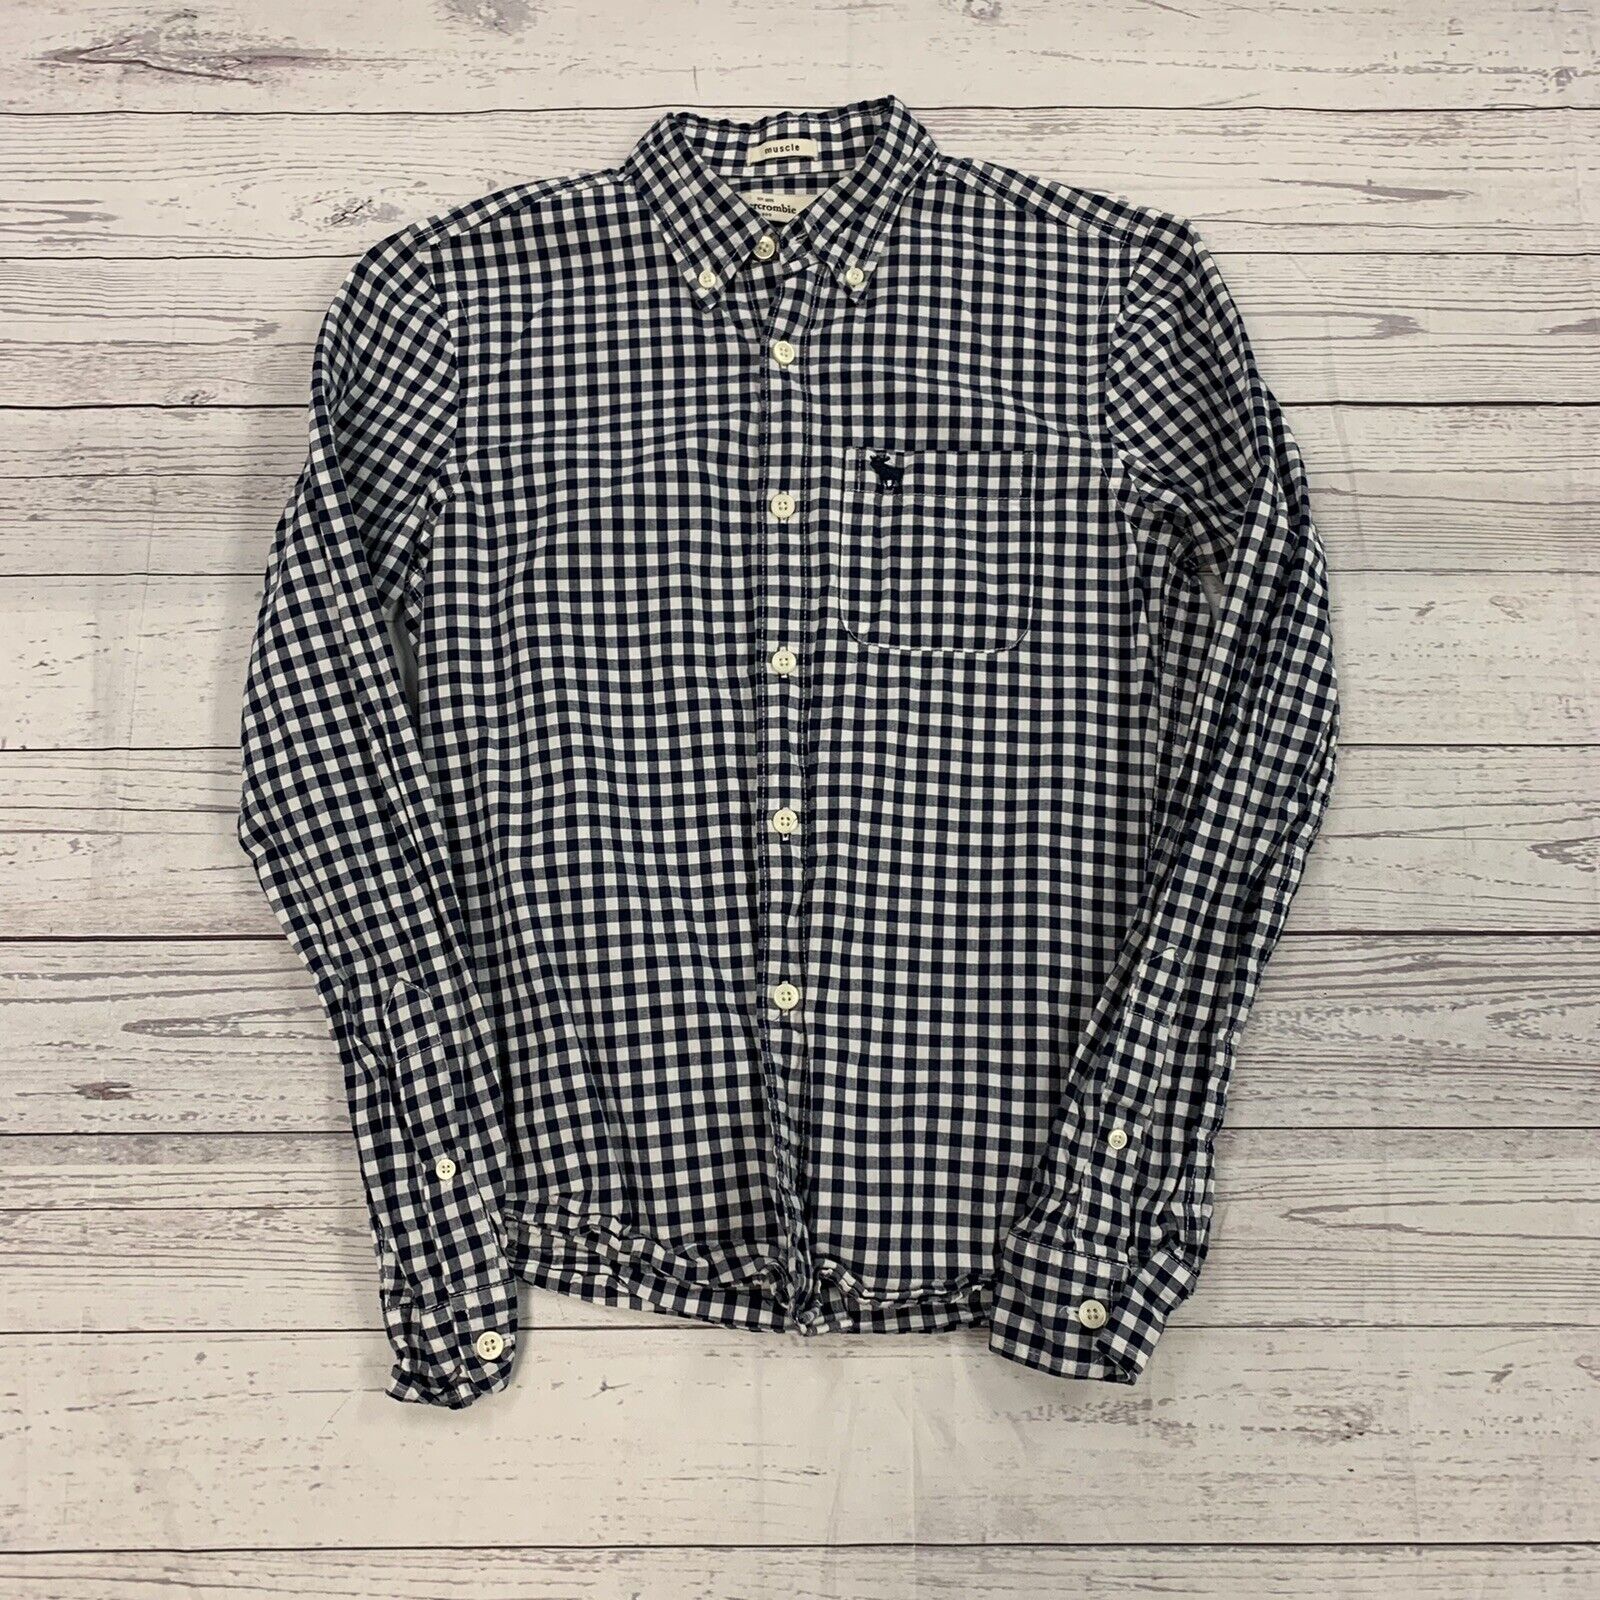 Abercrombie Plaid Ranking TOP10 Button Up Kids Size XL A surprise price is realized